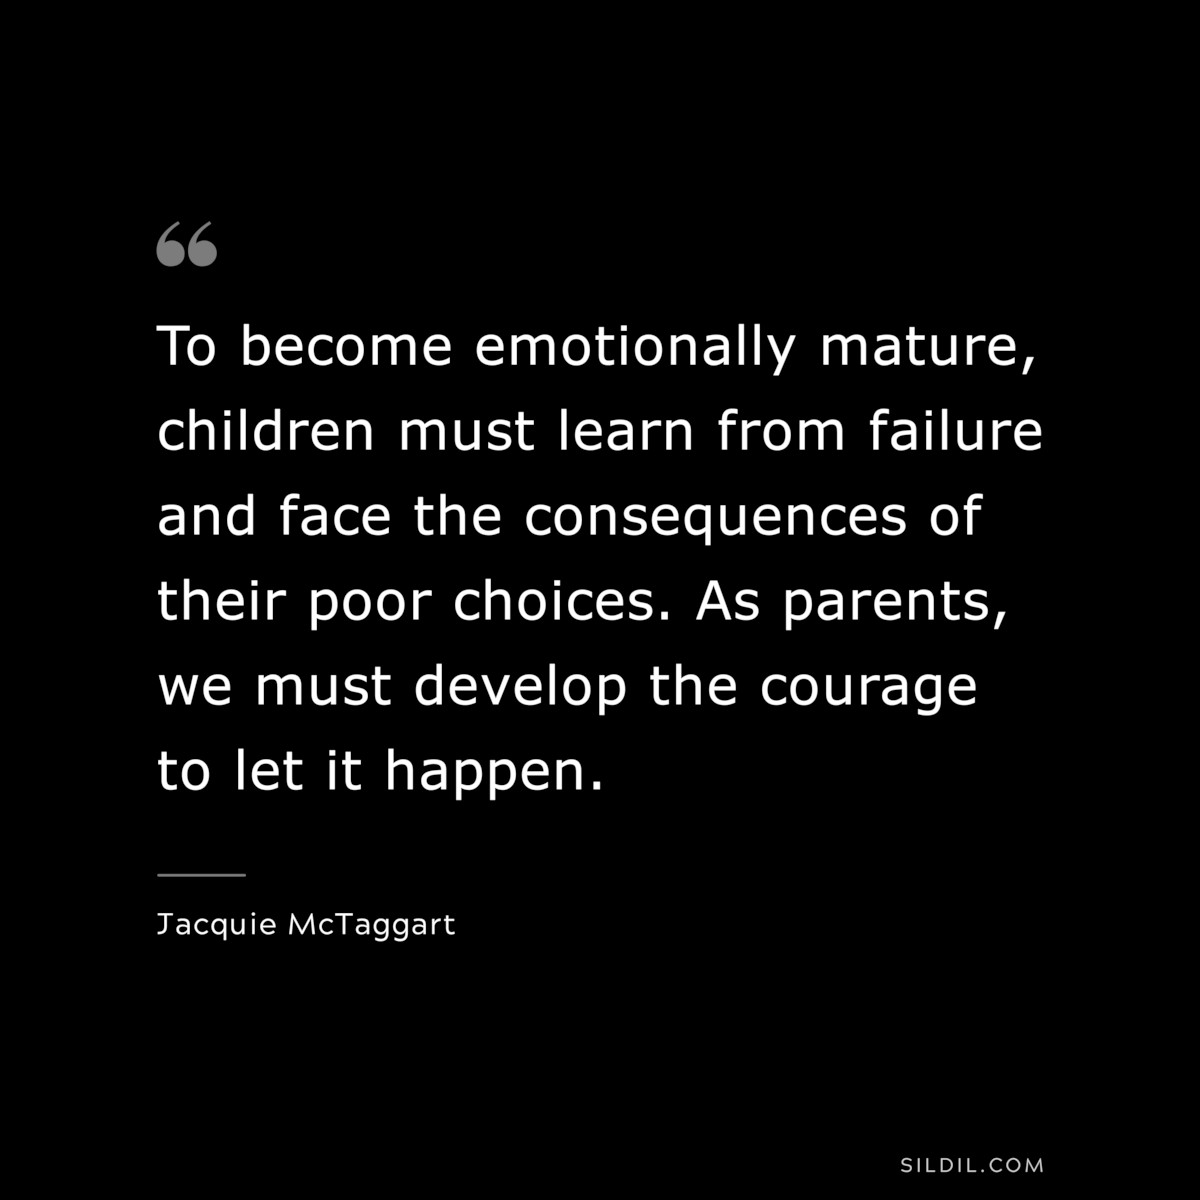 To become emotionally mature, children must learn from failure and face the consequences of their poor choices. As parents, we must develop the courage to let it happen. ― Jacquie McTaggart